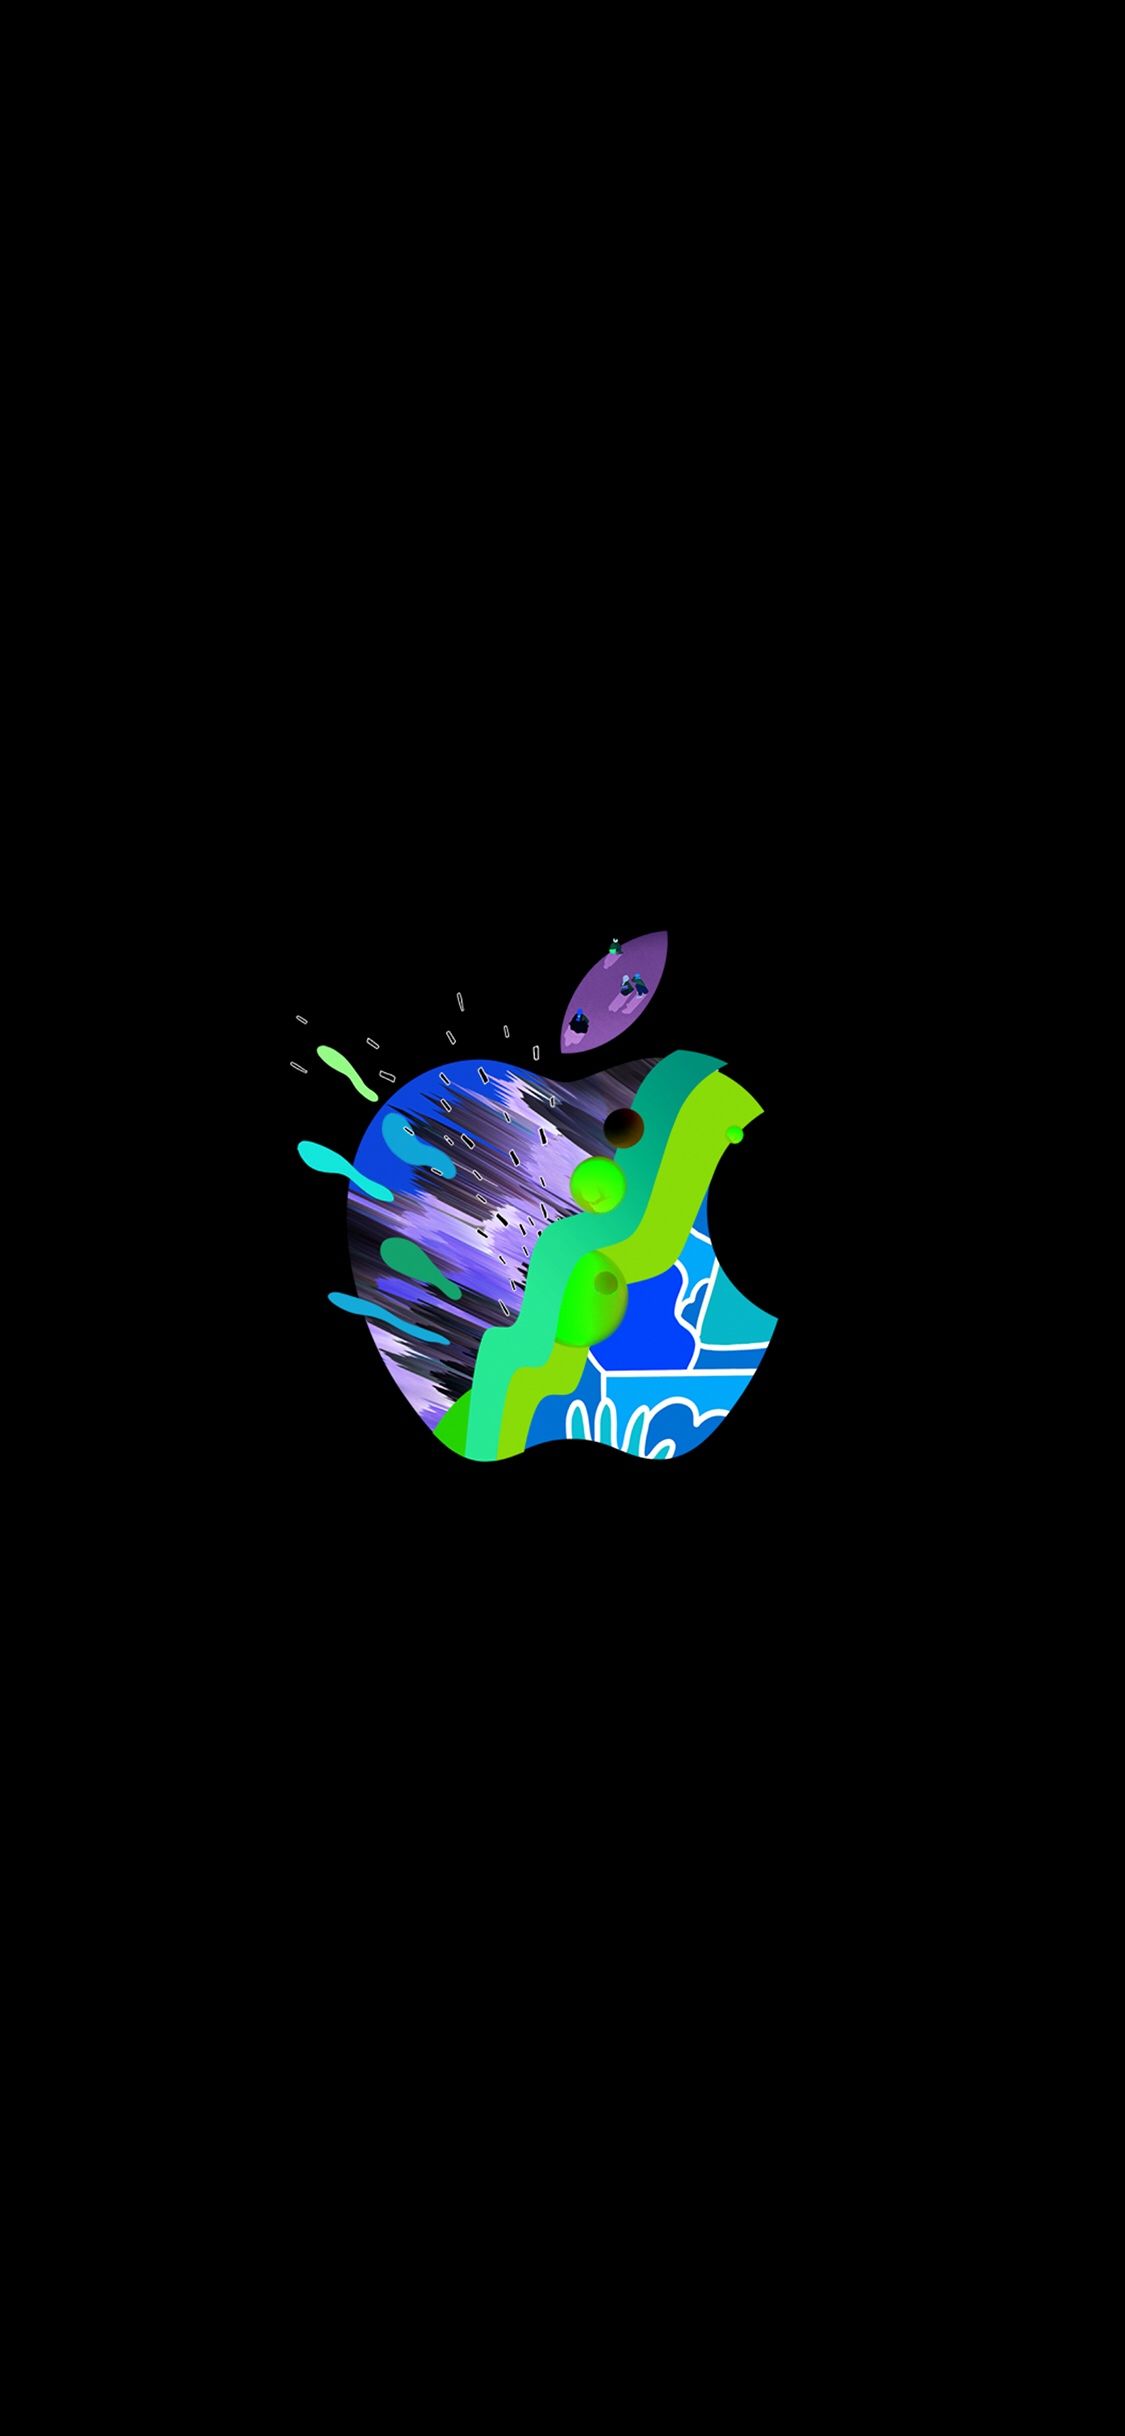 Milan Apple store and iPhone Xs event inspired wallpaper